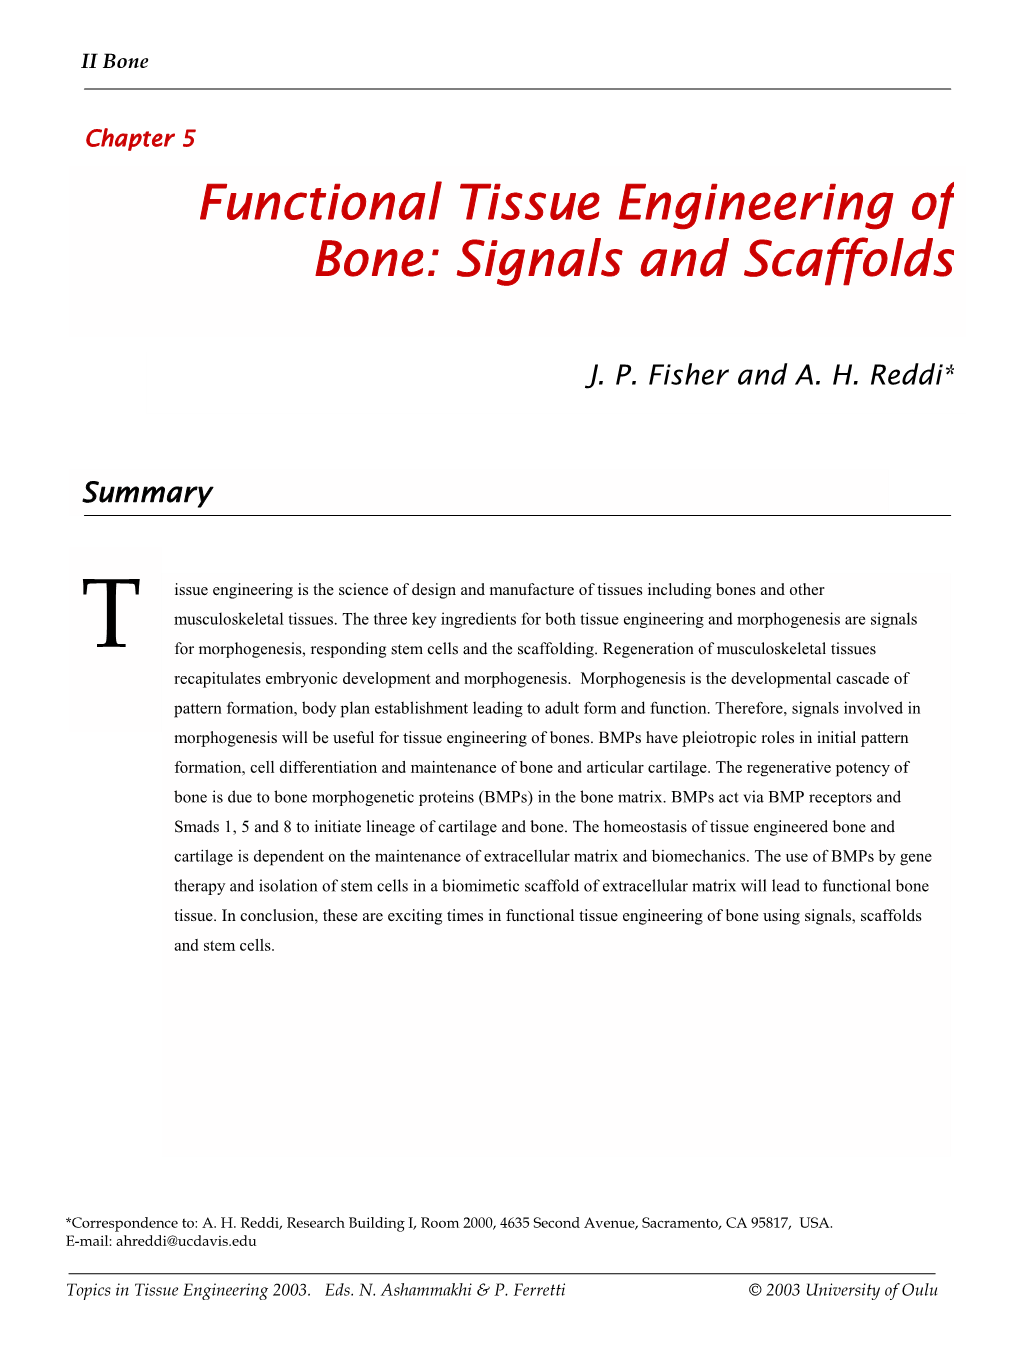 Functional Tissue Engineering of Bone: Signals and Scaffolds